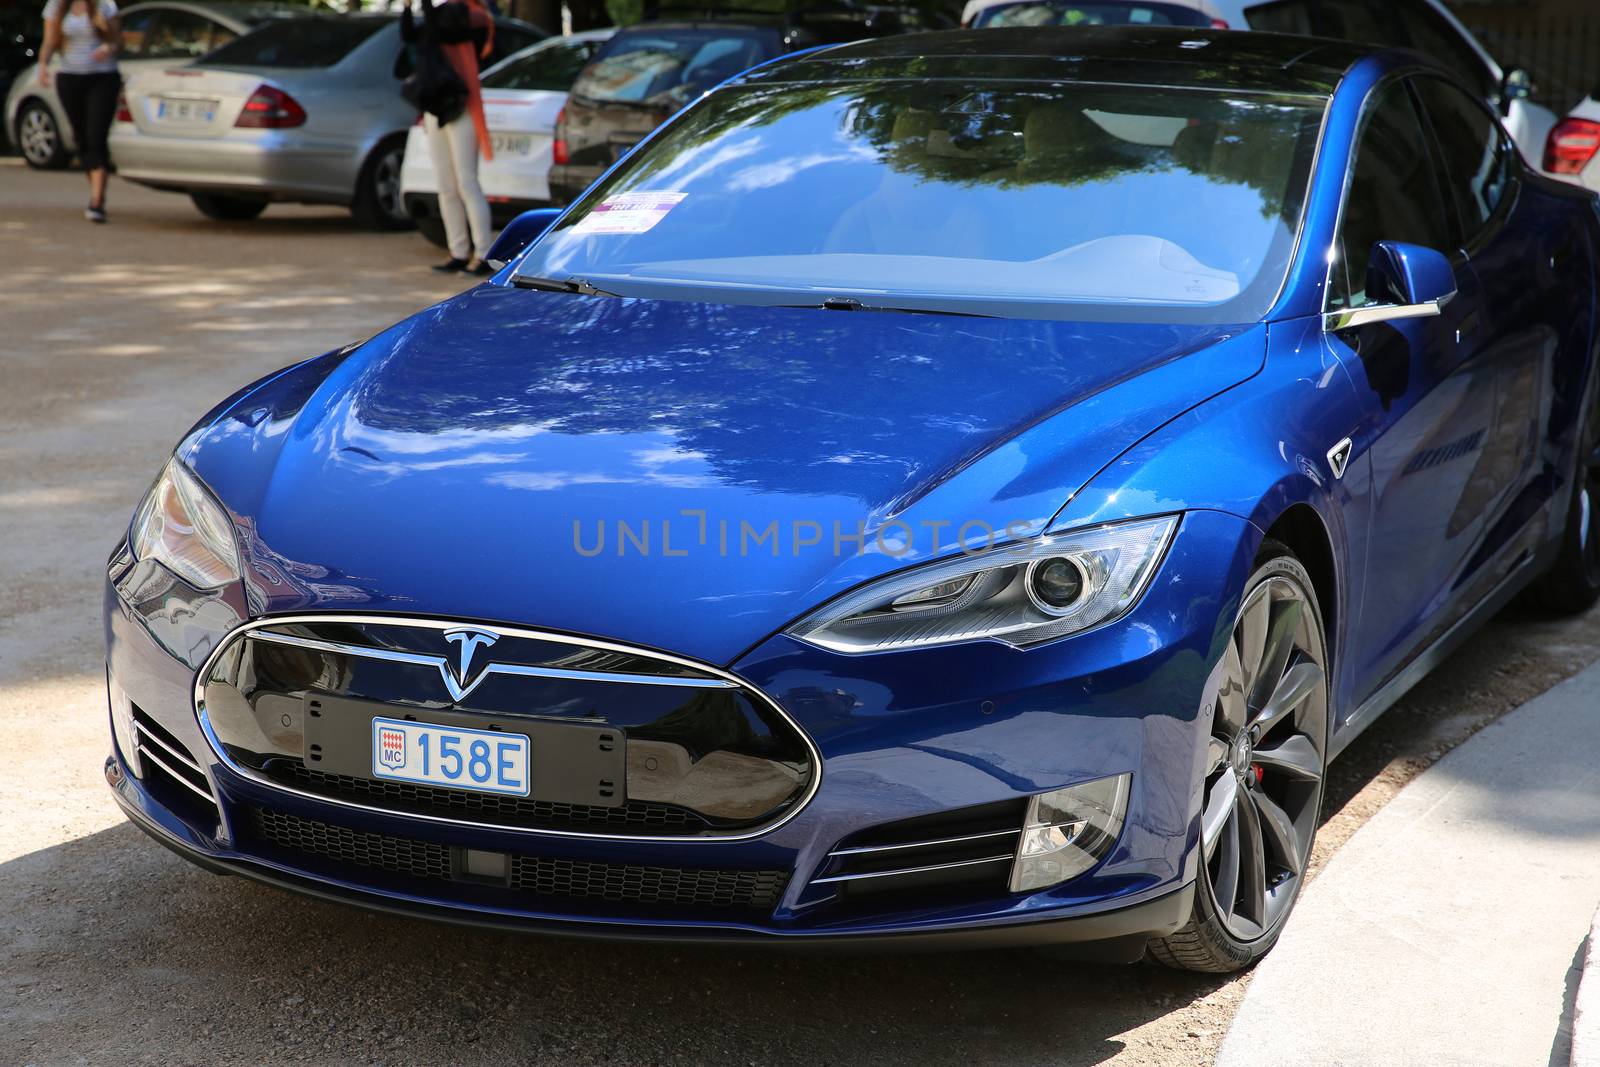 Nice, France - May 15, 2016: Blue Tesla Model S P90D Car Parked in Front of the Nice Orthodox Church